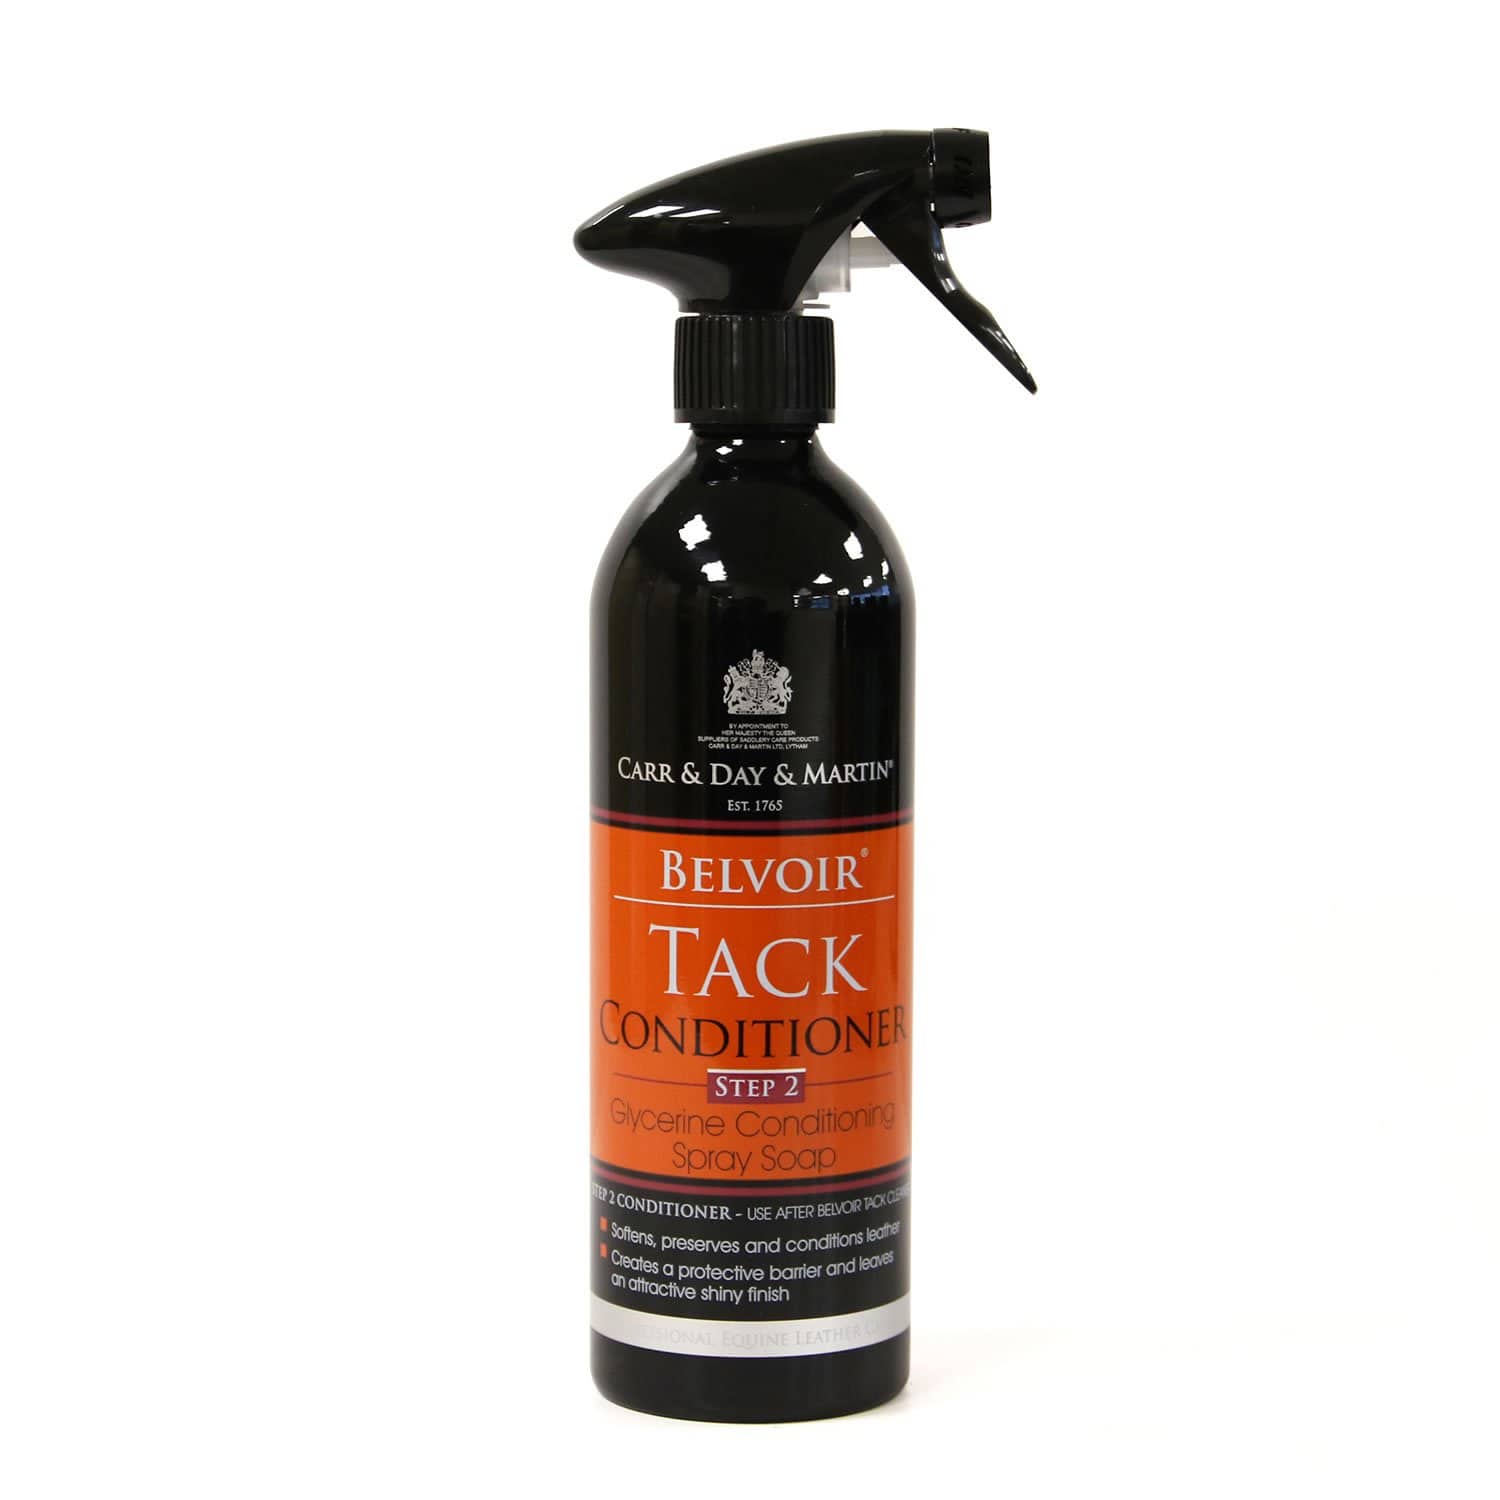 Carr & Day & Martin Belvoir Tack Conditioner Step 2 - Fetlox